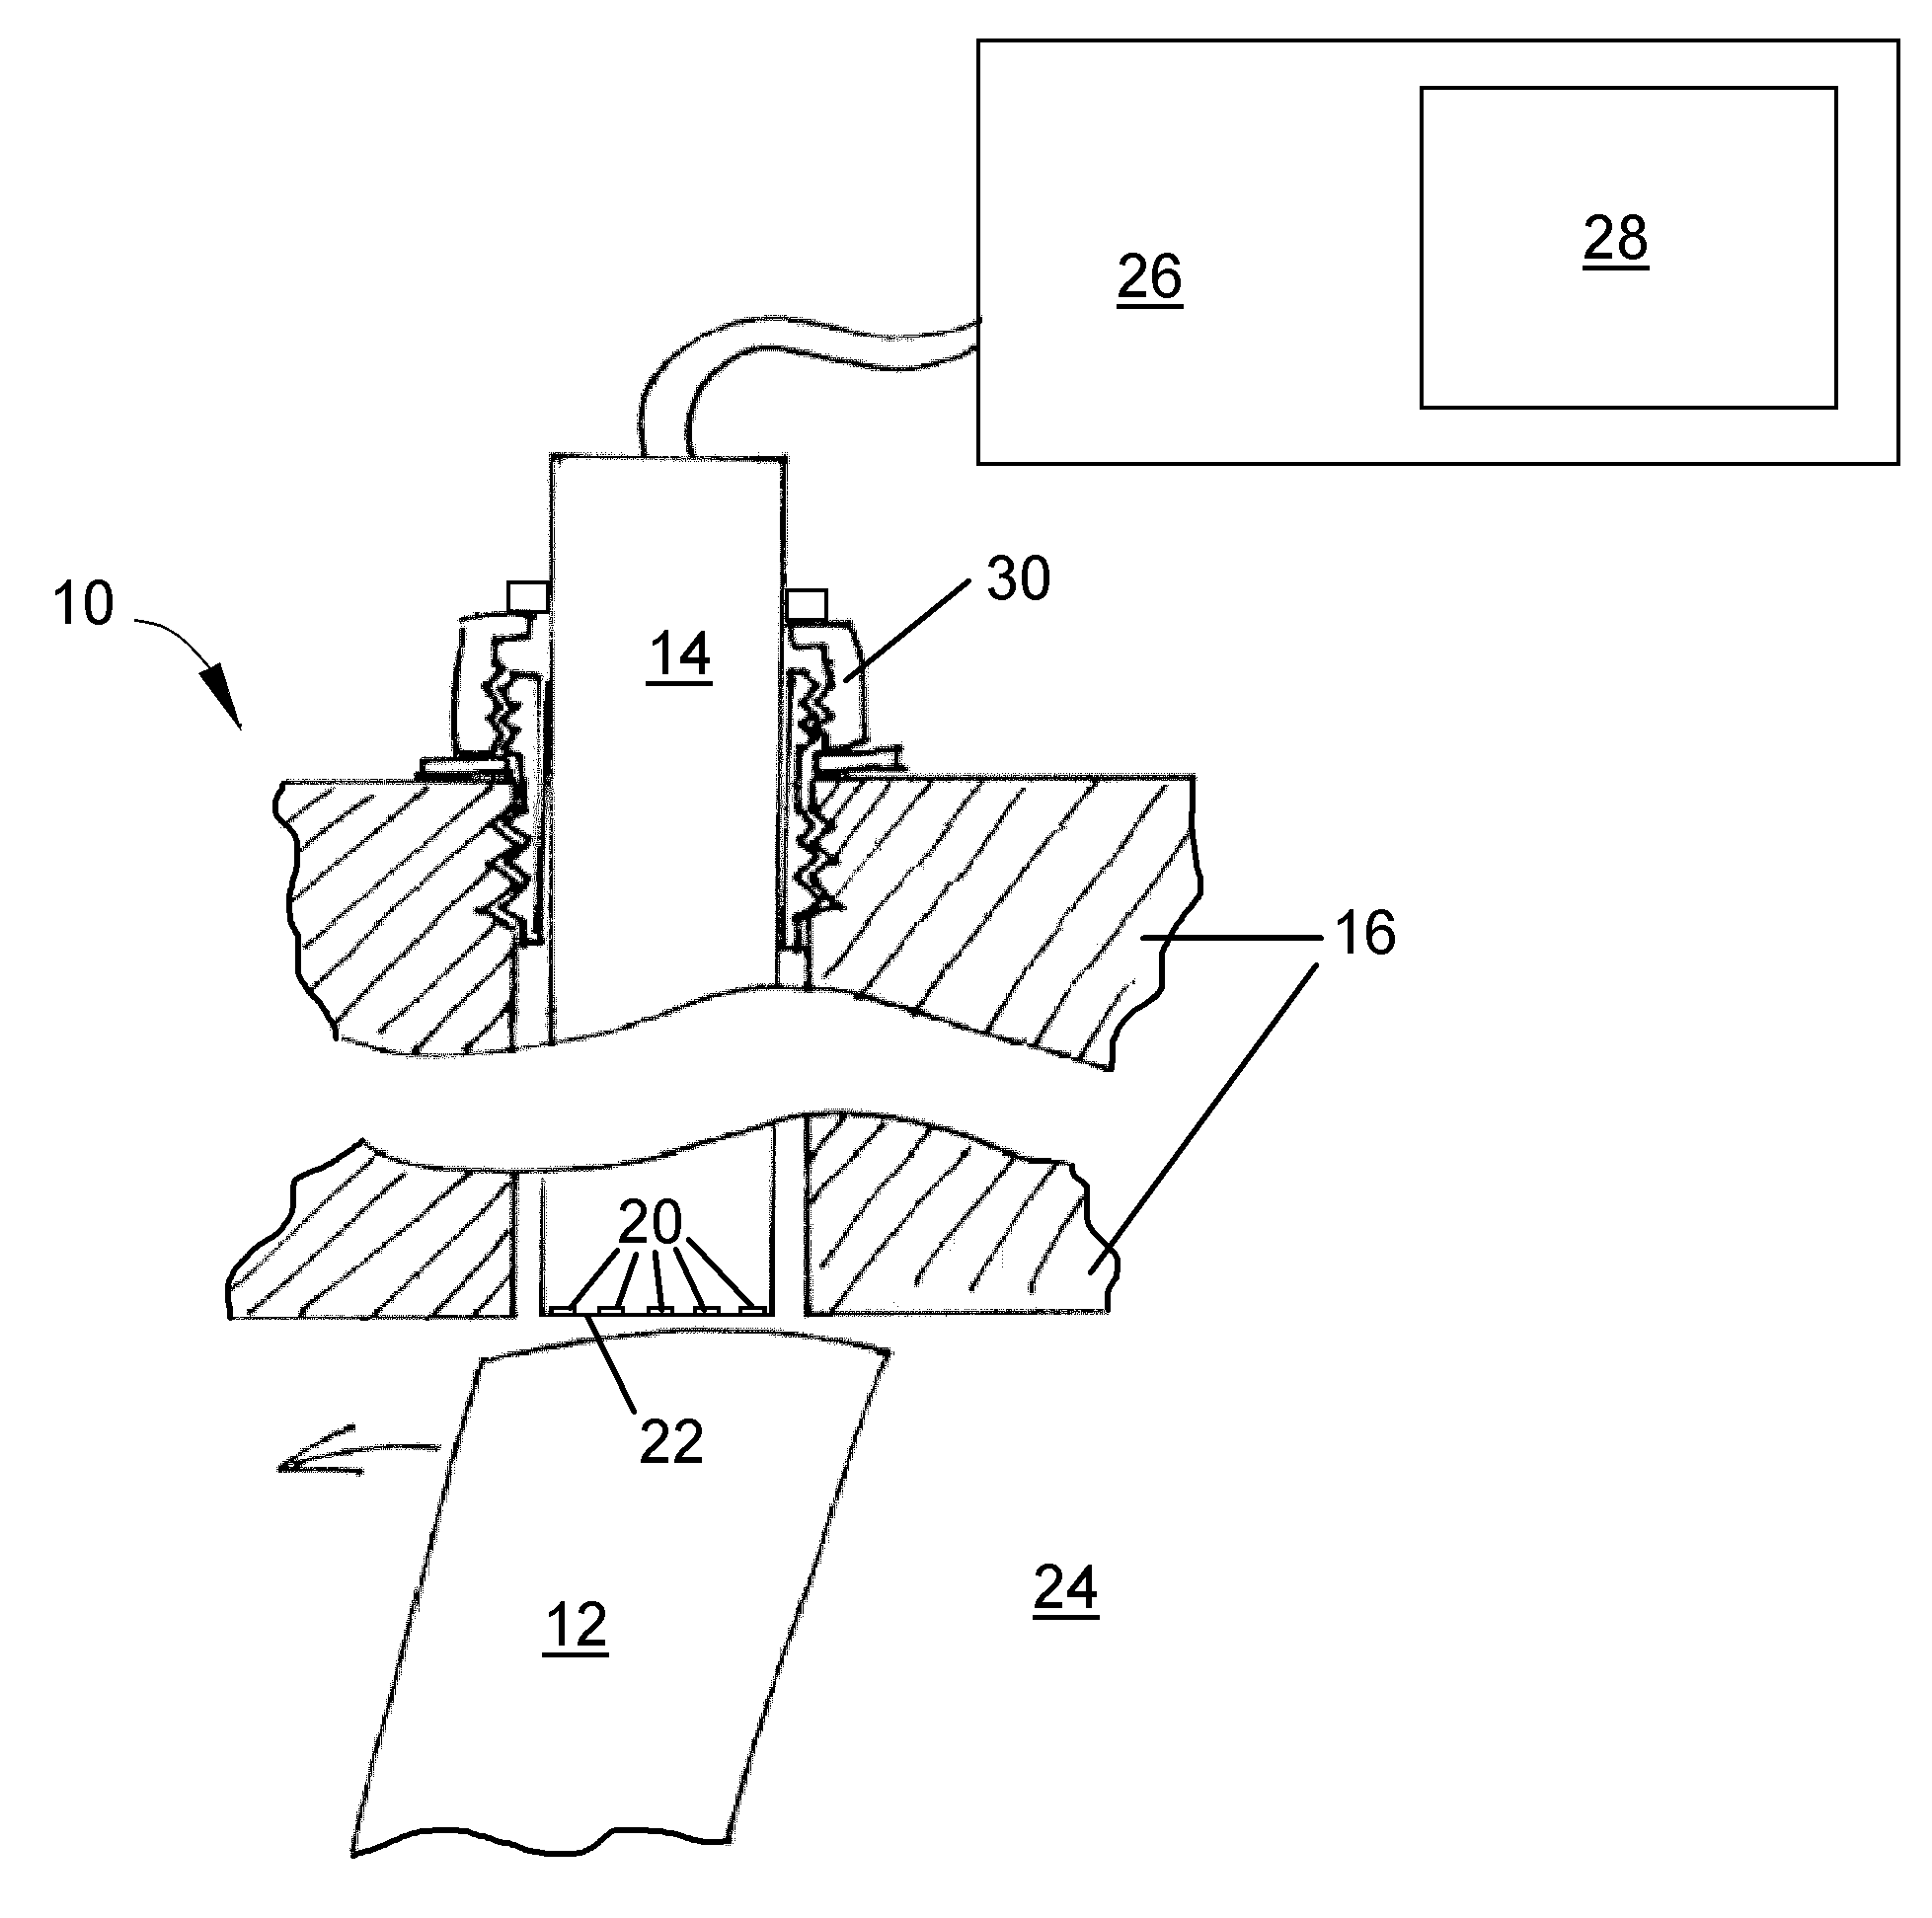 System and method for online monitoring of corrosion of gas turbine components